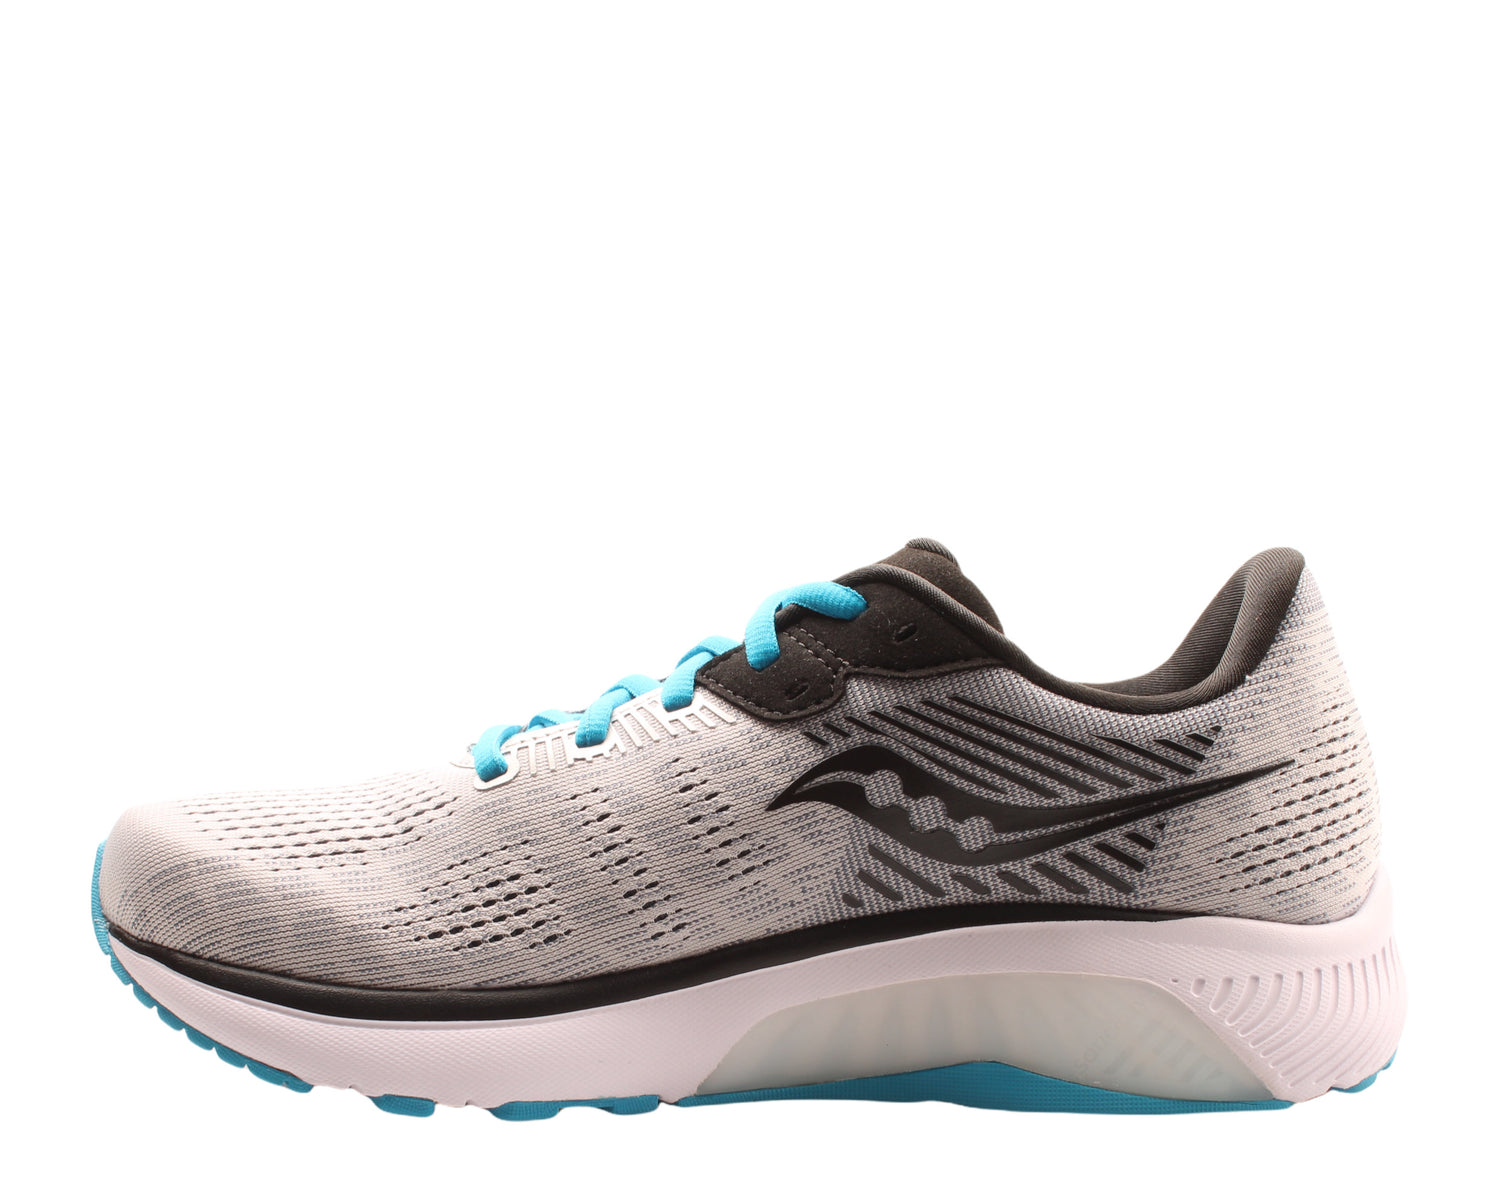 Saucony Guide 14 Men's Running Shoes